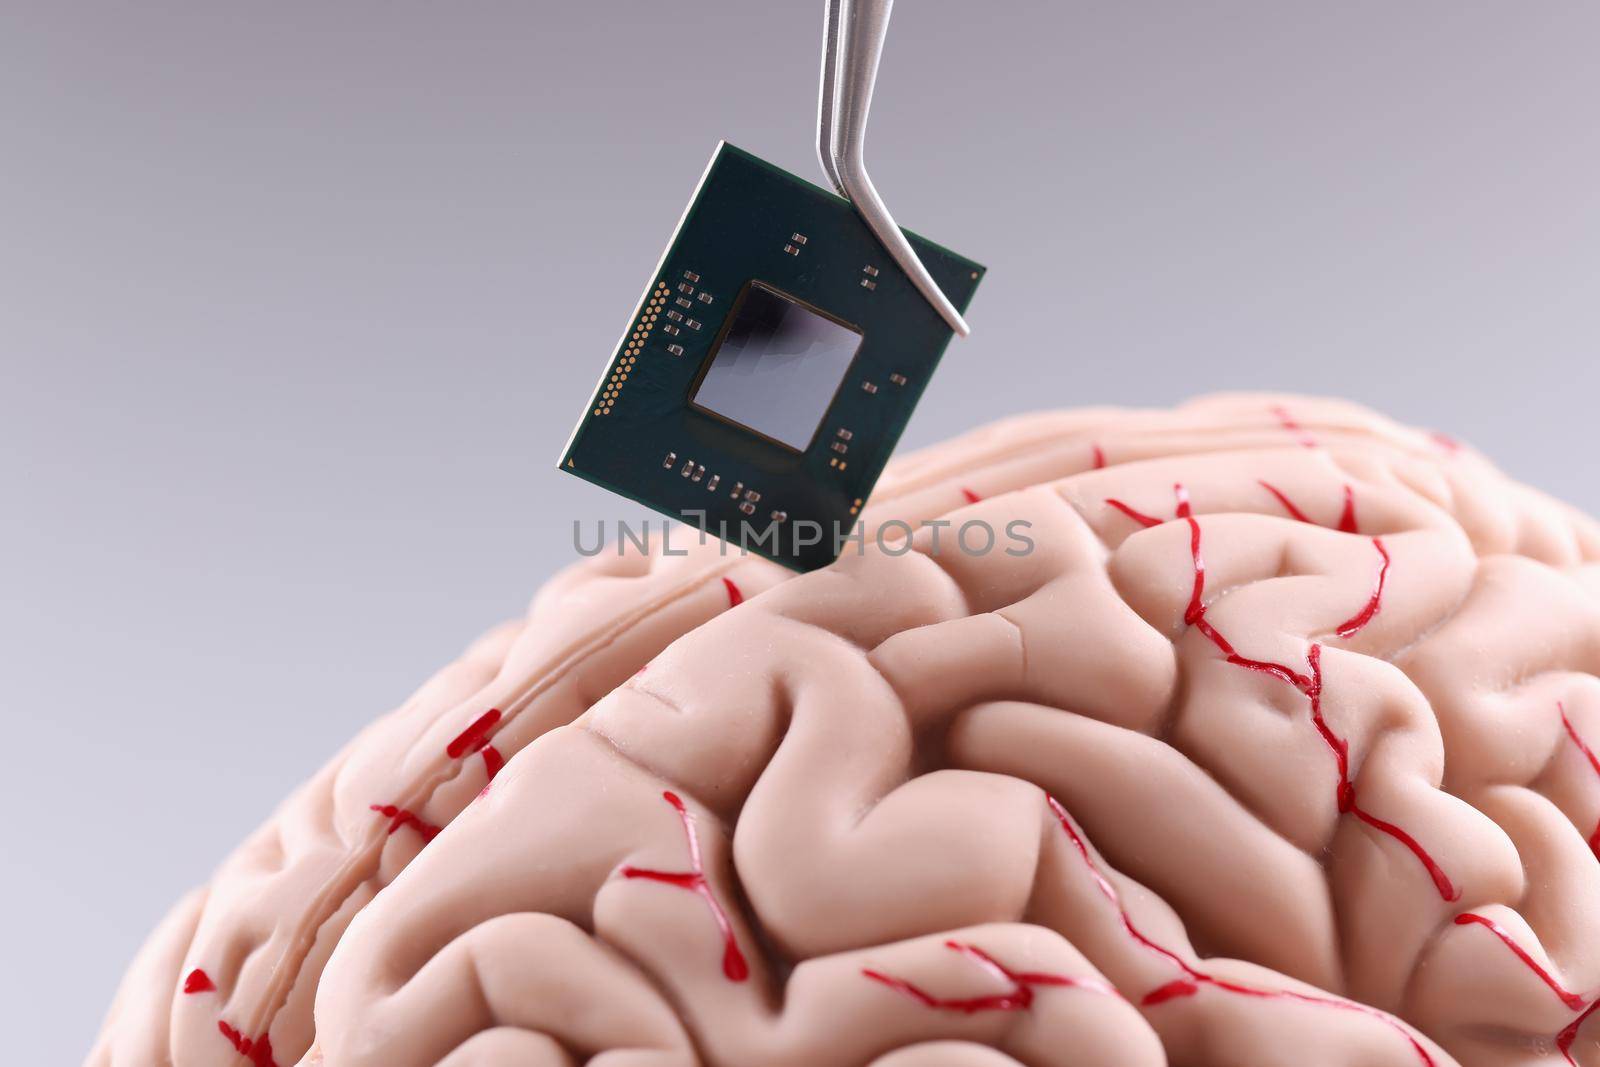 Human brain and computer chip. Microprocessor in head. Science and technology concept